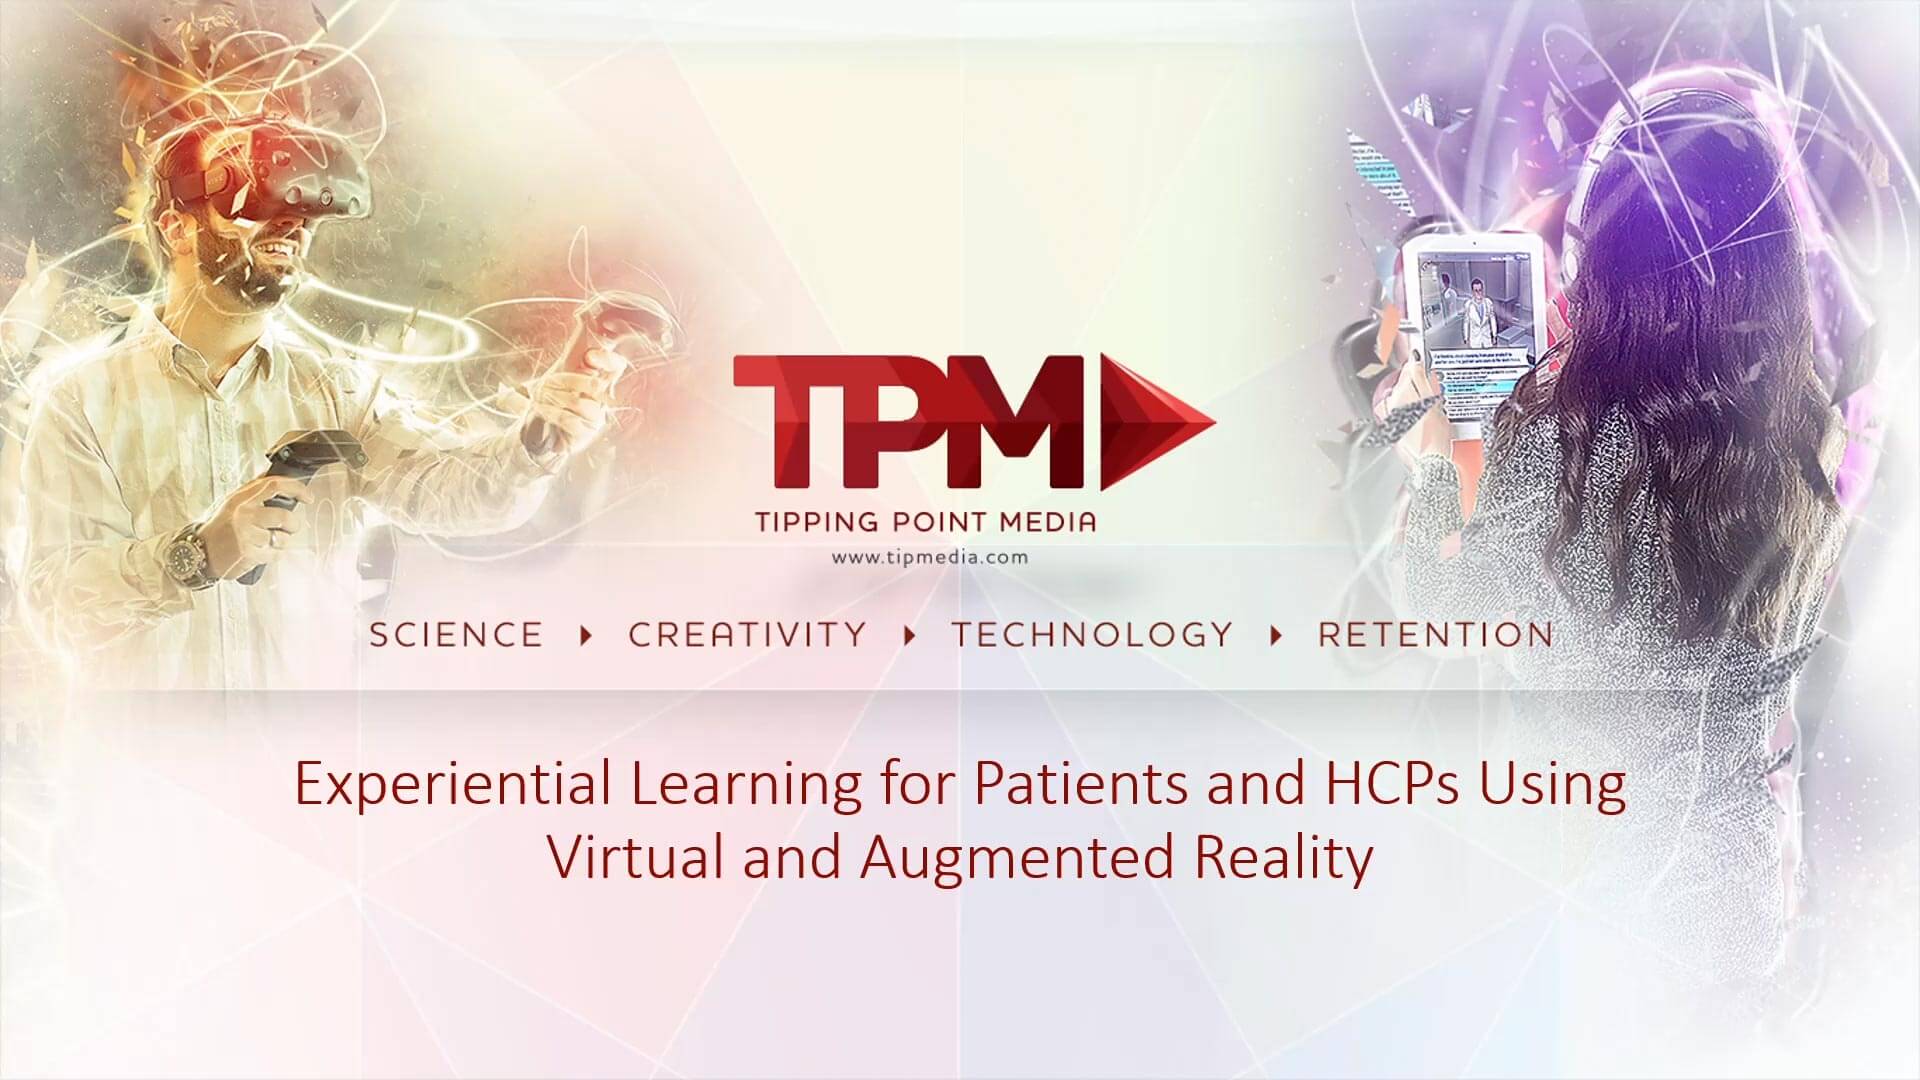 Experiential Learning for Patients and HCPs Using Virtual and Augmented Reality